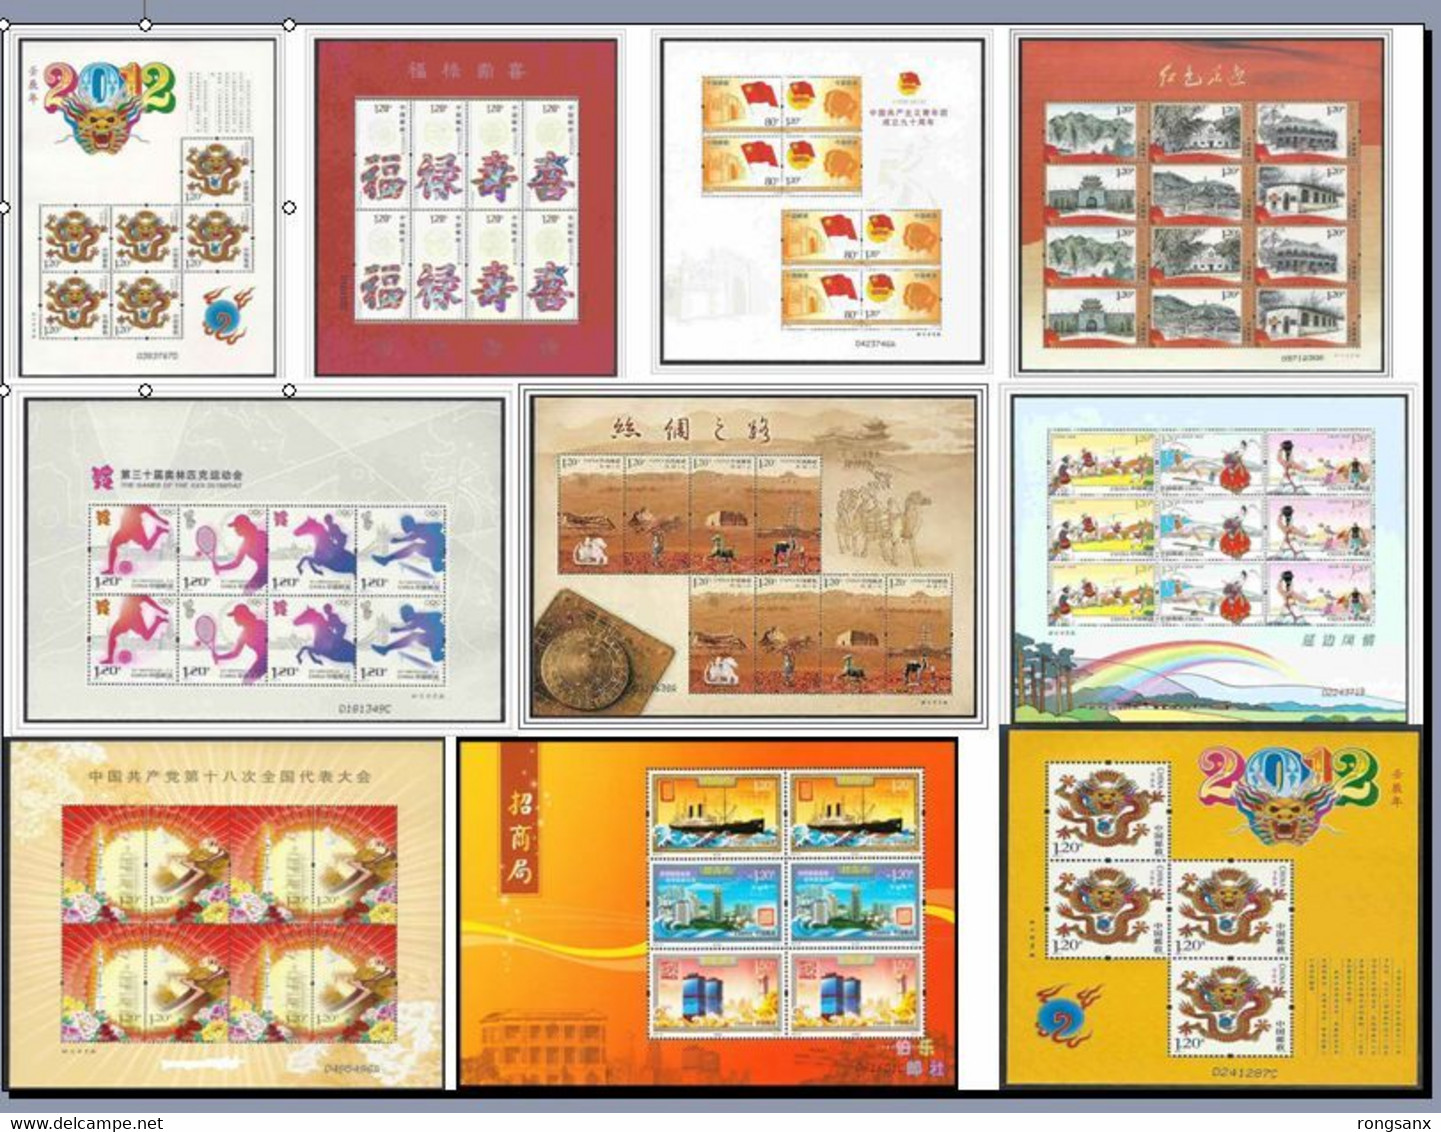 2012 CHINA YEAR PACK INCLUDE 9 SHEETLET SEE PICS - Annate Complete